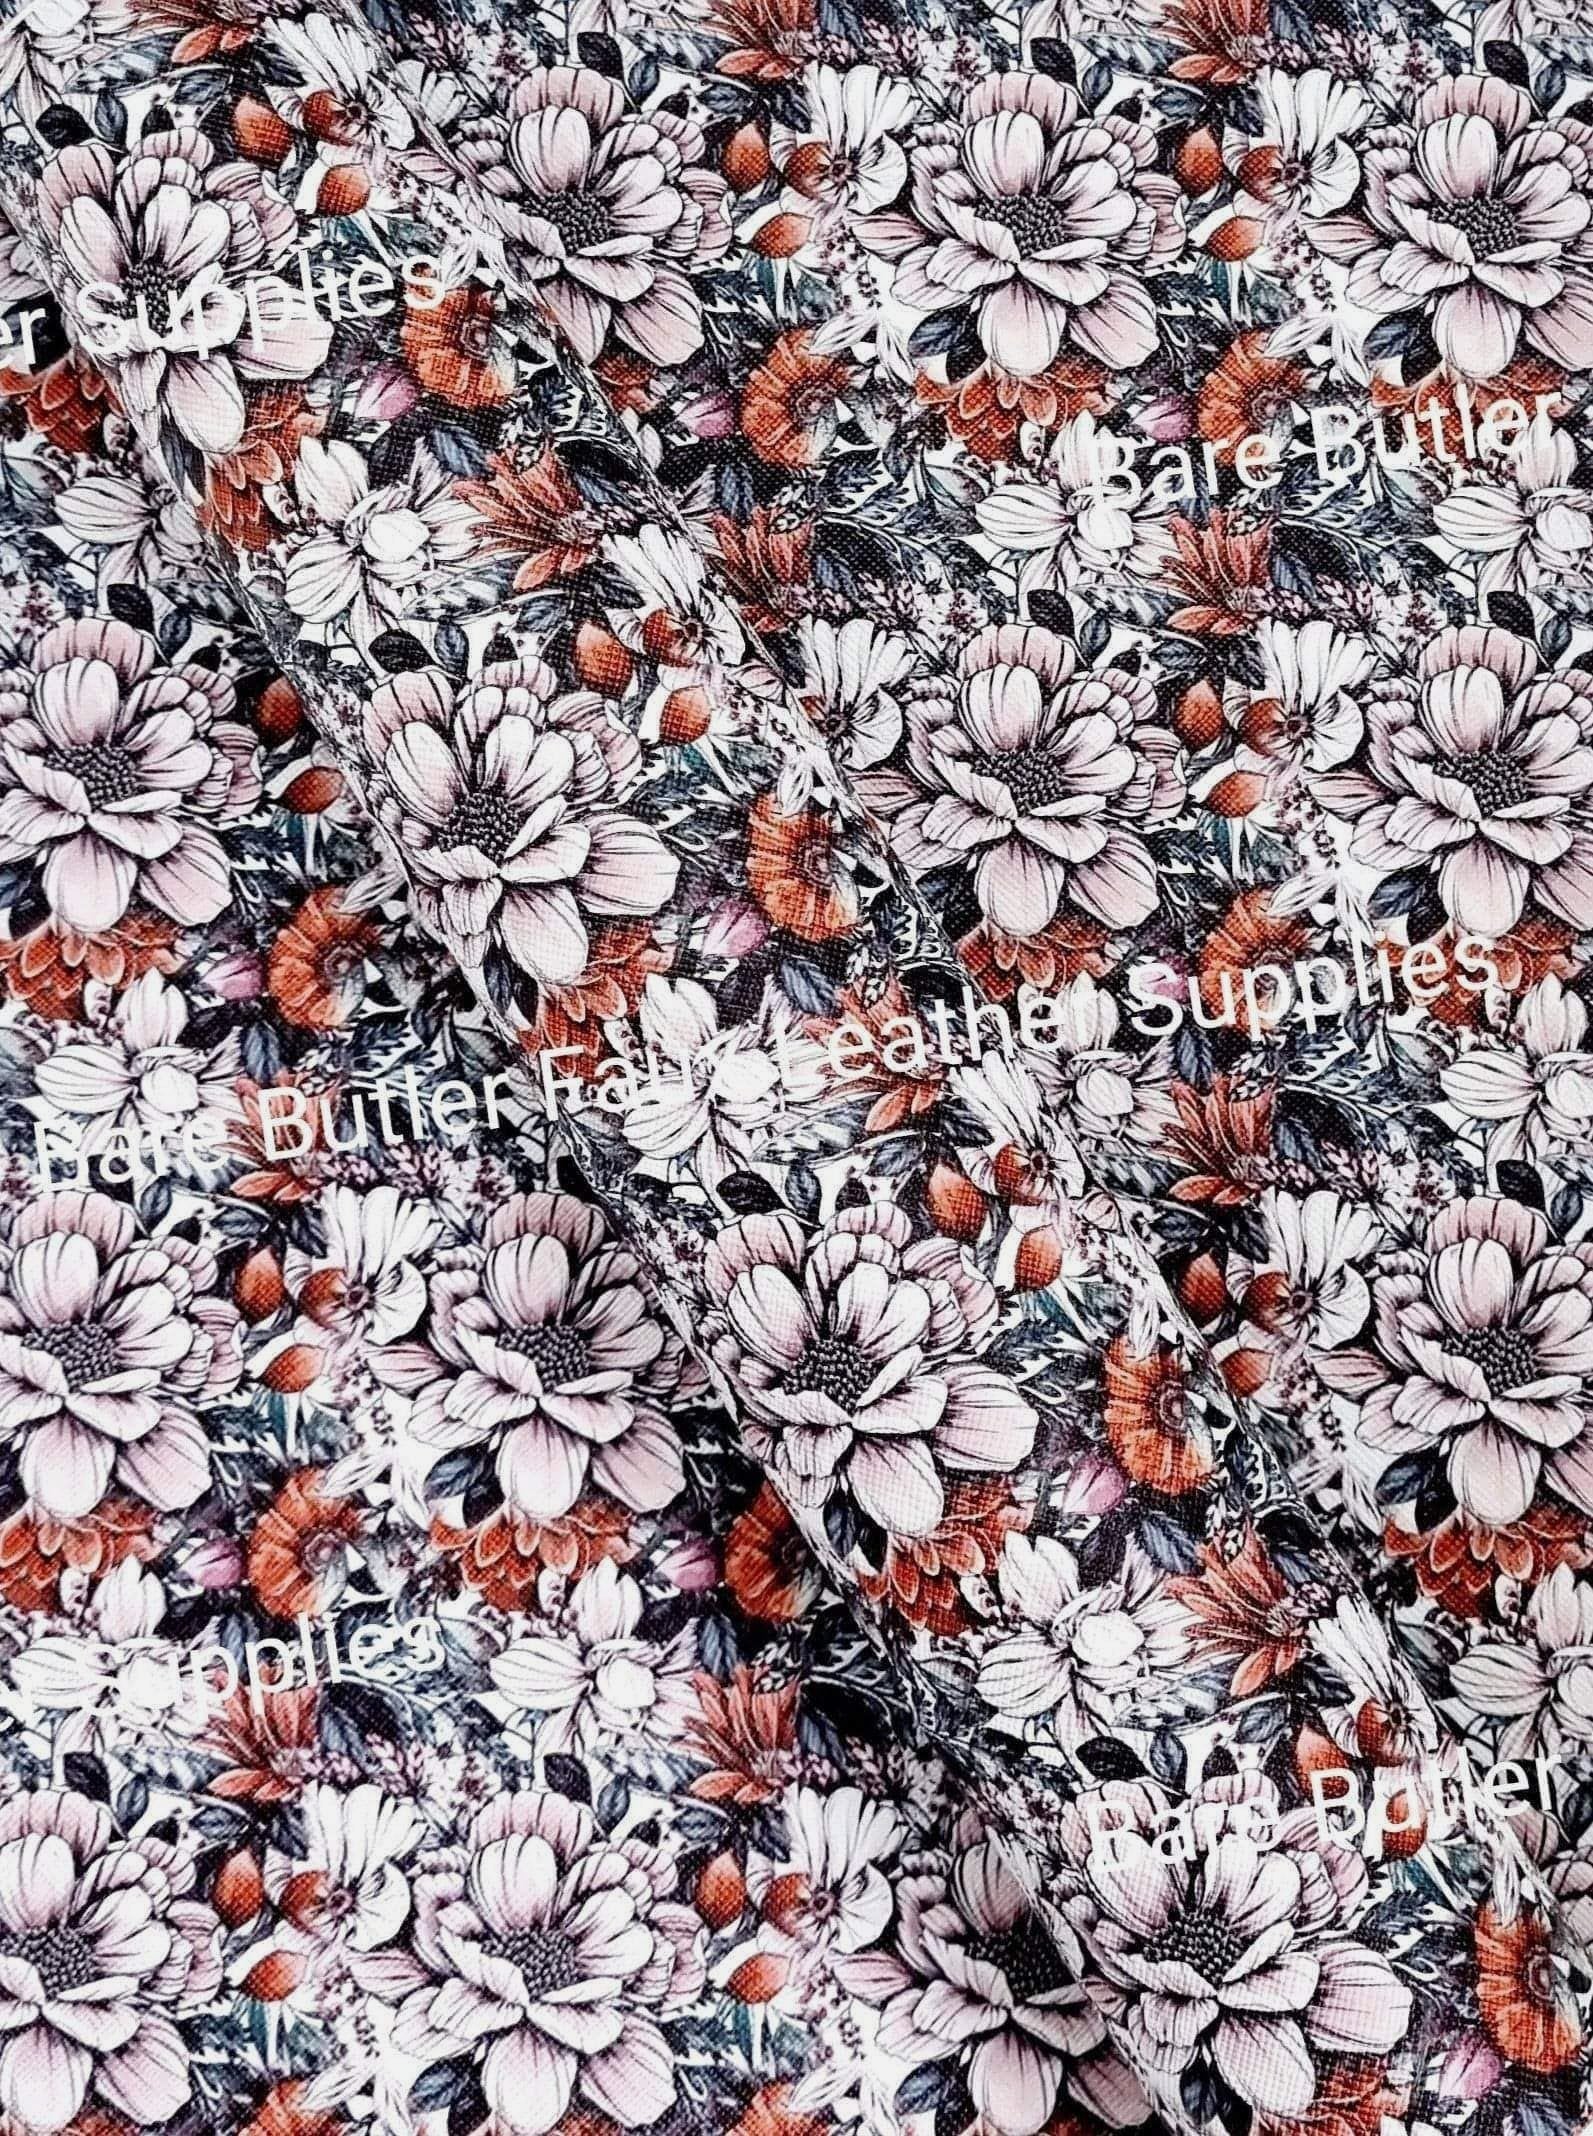 Angel Amber Florals Faux Leather - Faux, Faux Leather, Flora, Floral, florals, flower, Flowers, Leather, leatherette - Bare Butler Faux Leather Supplies 